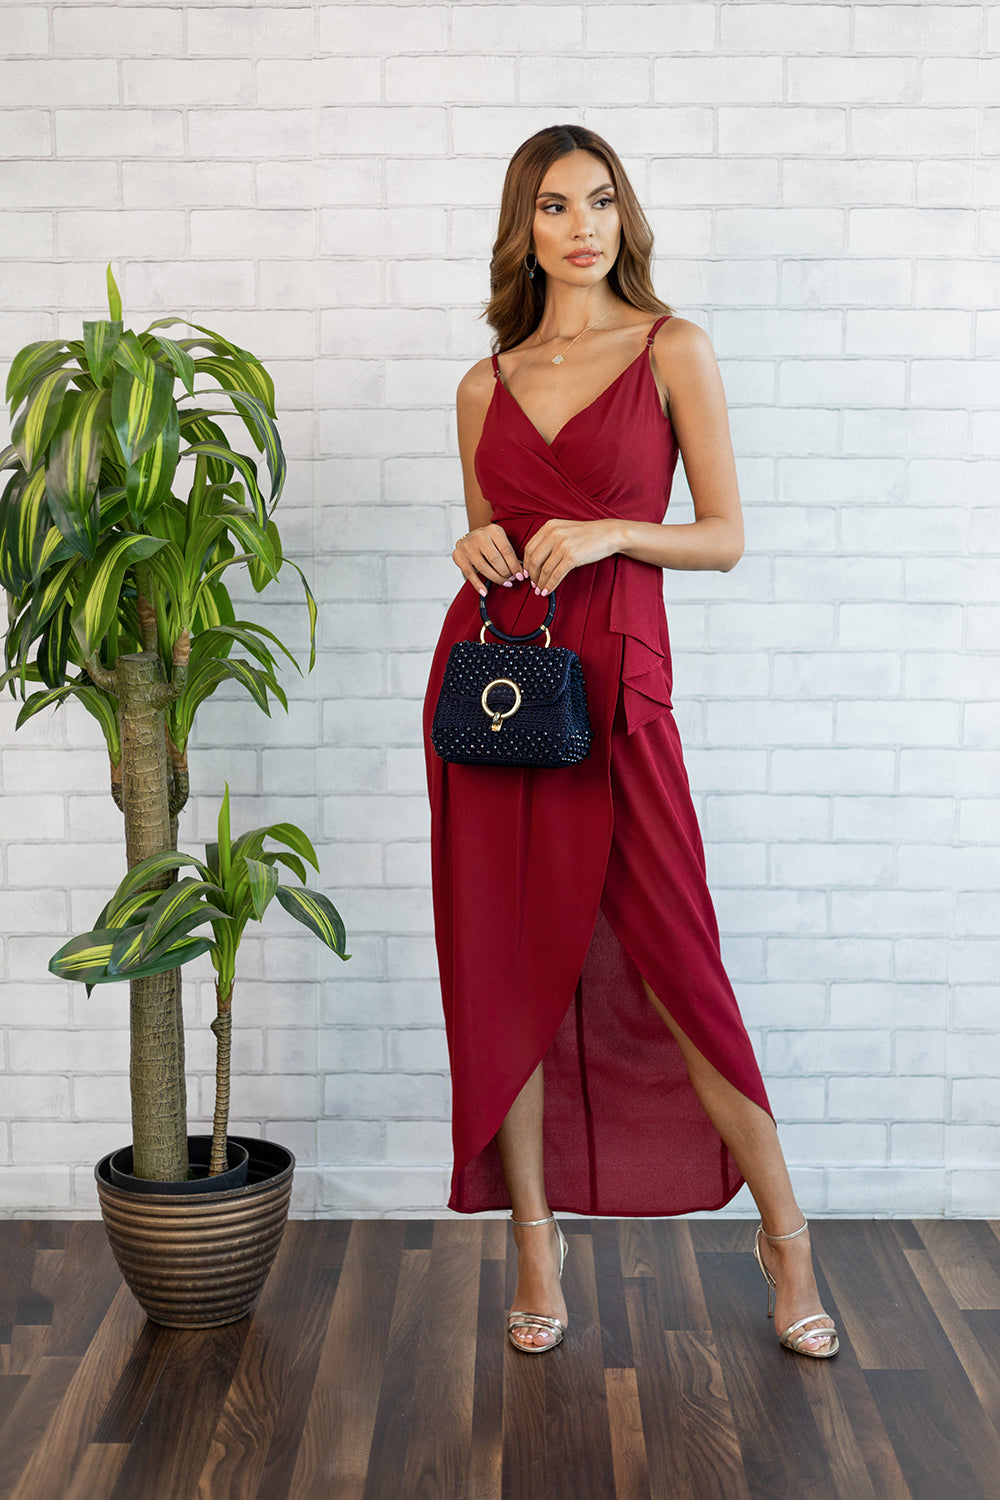 WHAT TO WEAR WITH YOUR RED MAXI DRESS?